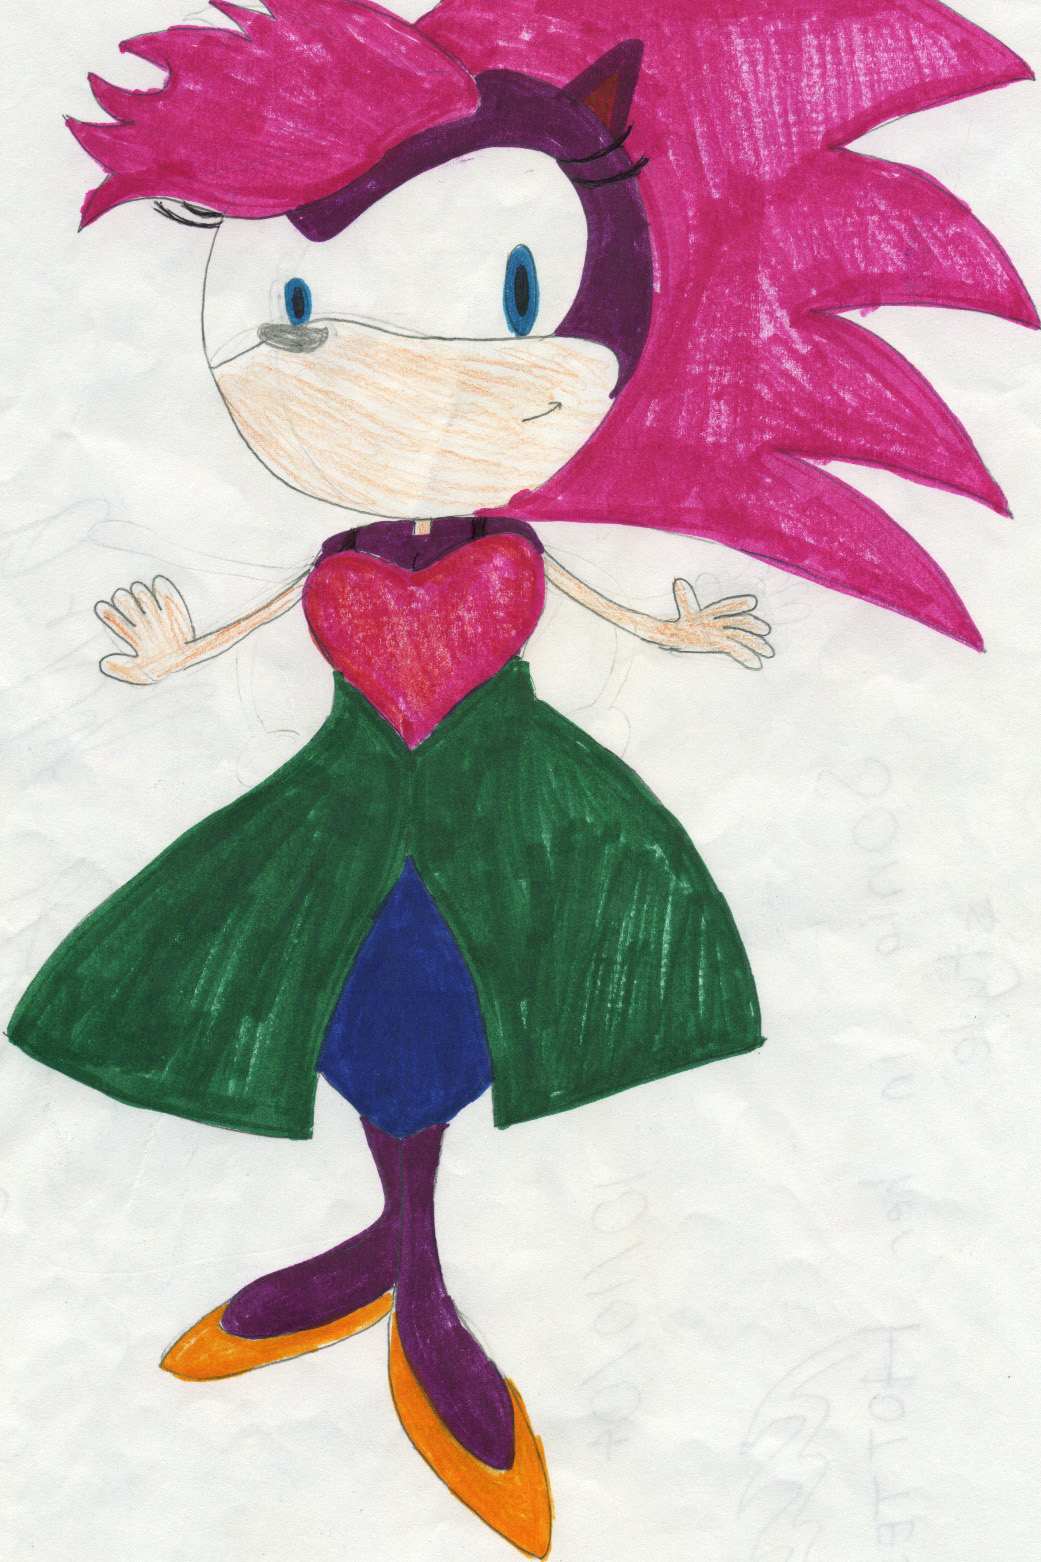 Sonia the Hedgehog by germanname